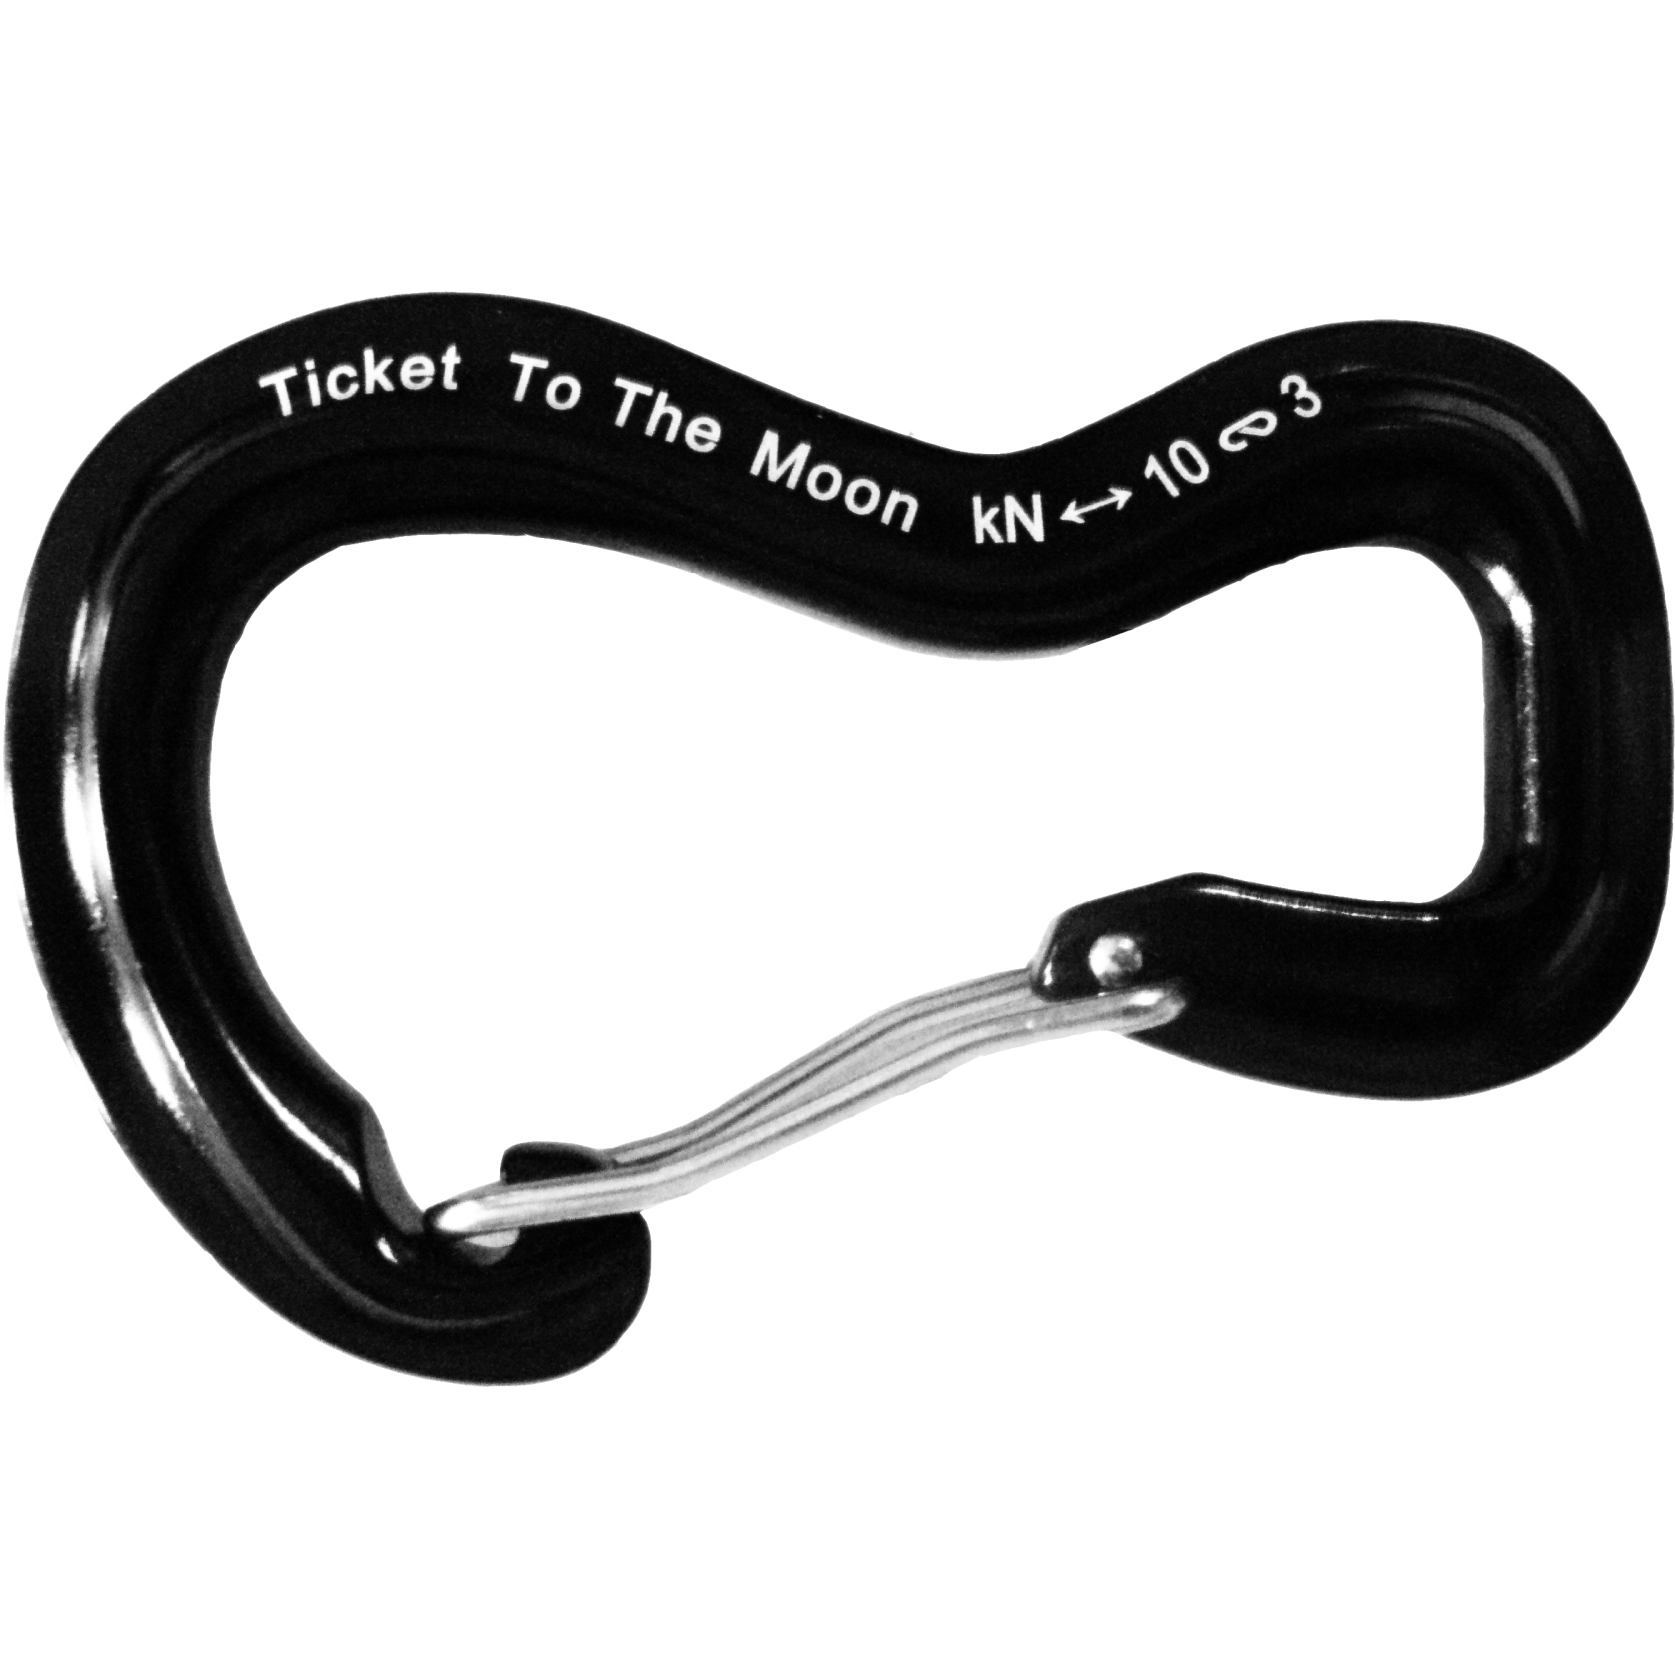 Picture of Ticket To The Moon Carabiner 10 kN - for Hammocks - 2 pcs.